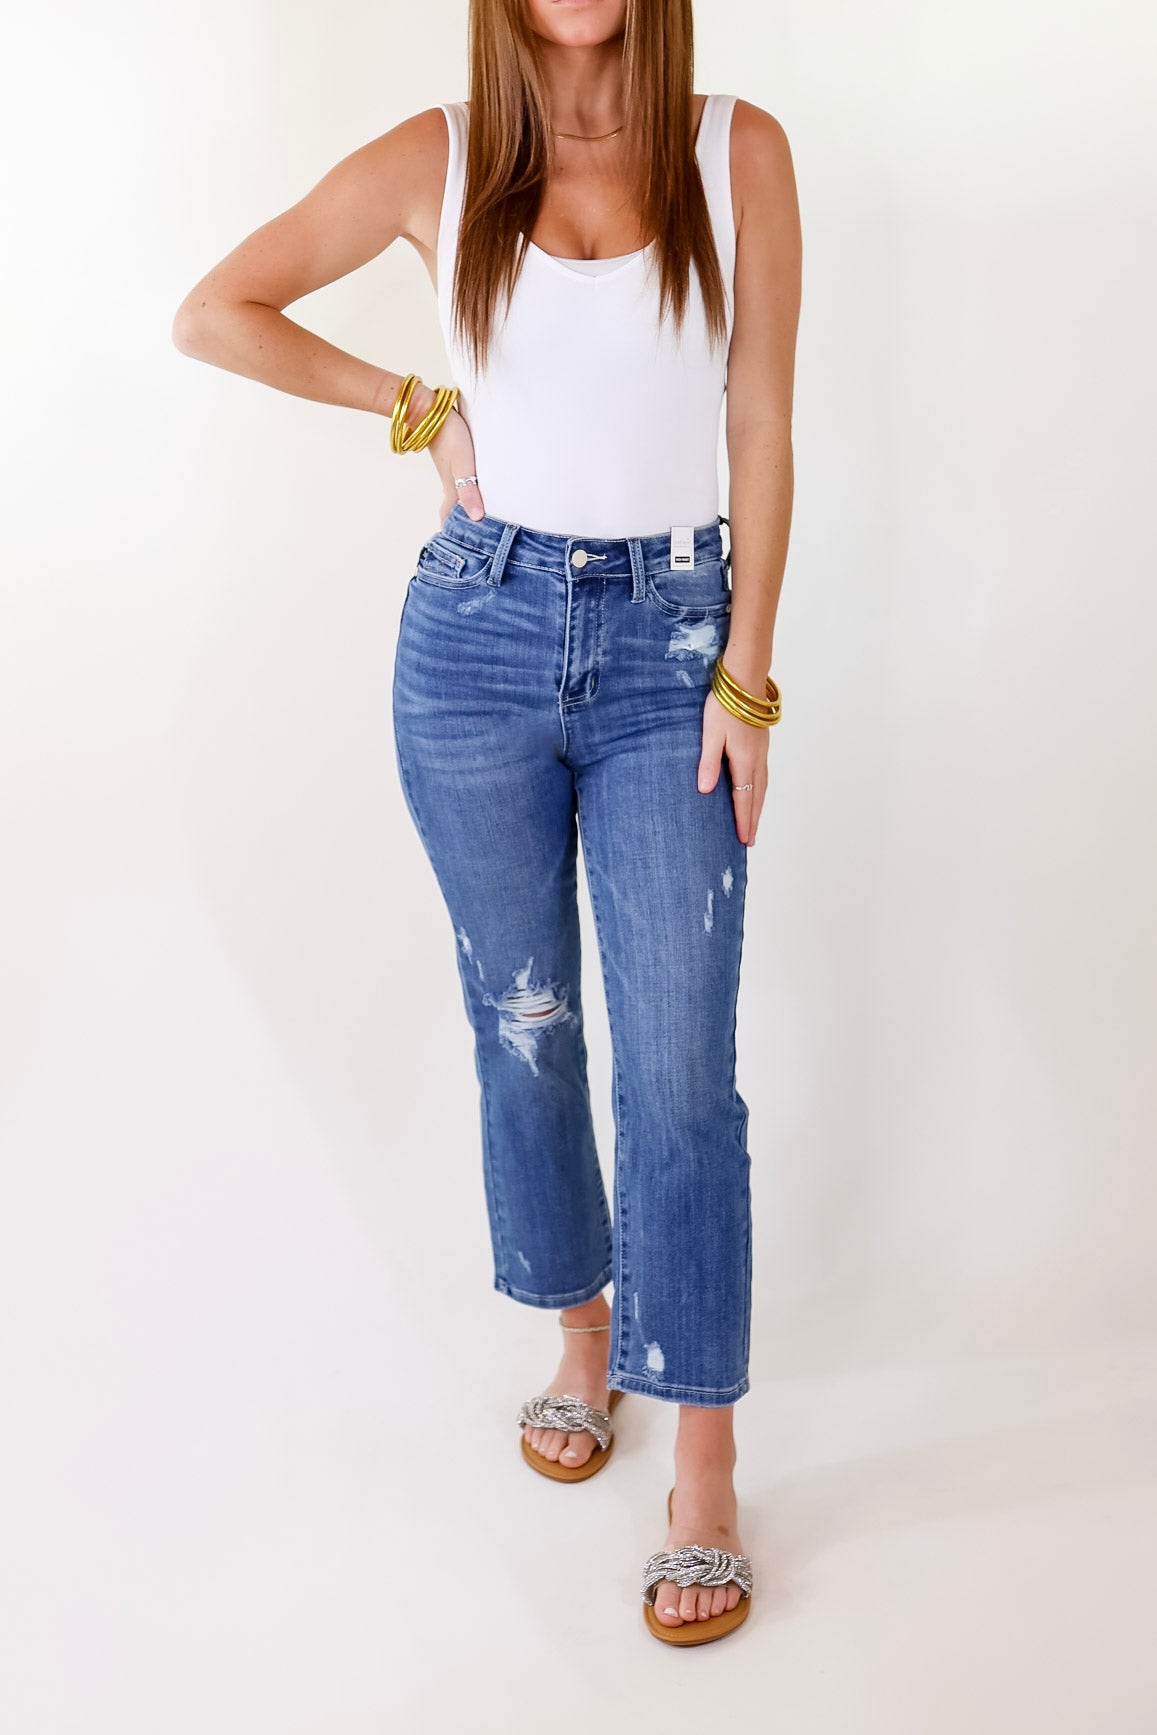 Judy Blue | Wonderful Weekend Ankle Length Straight Leg Jeans in Medium Wash - Giddy Up Glamour Boutique